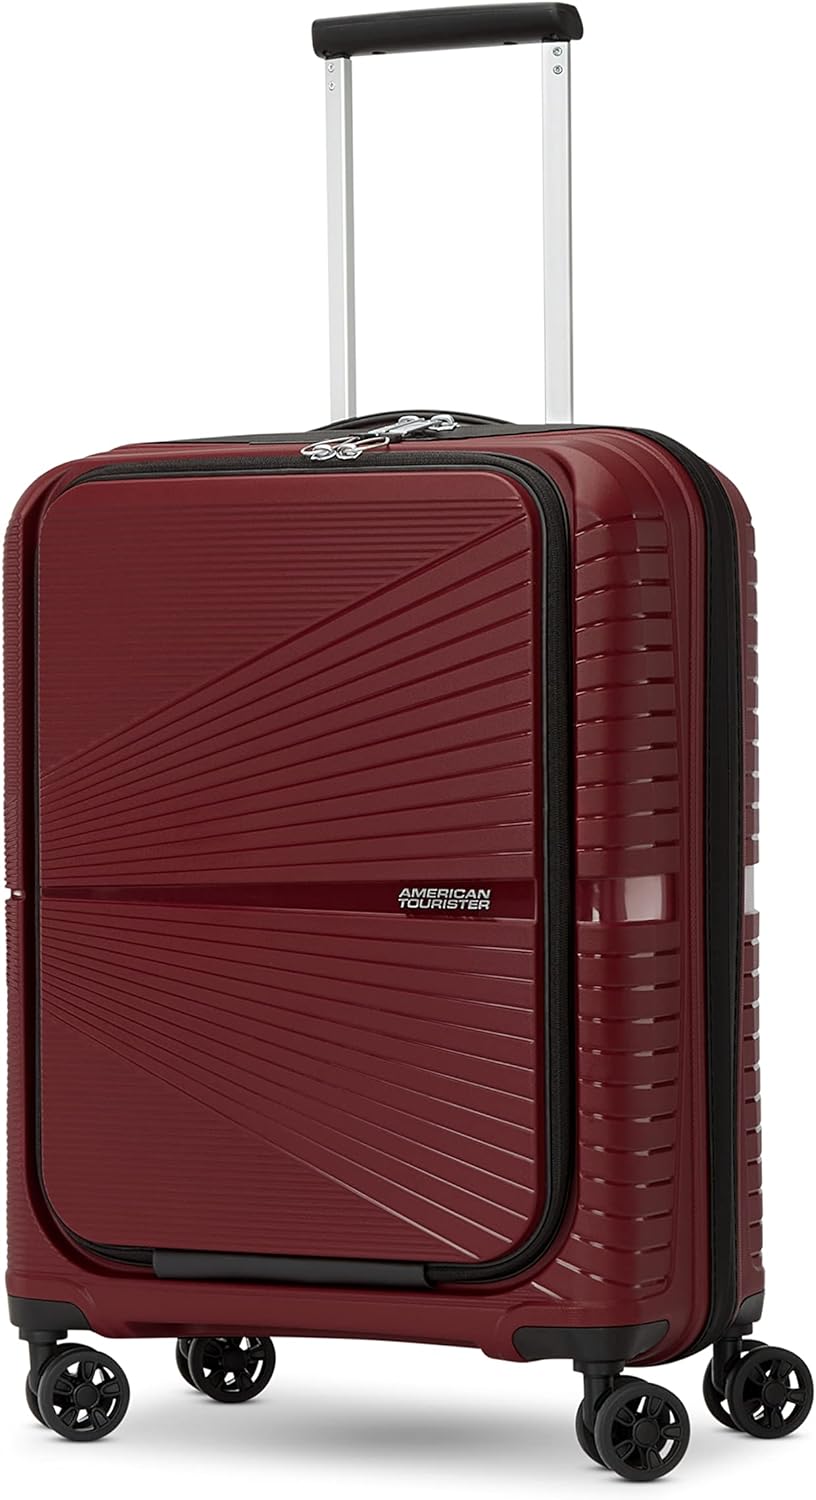 American Tourister Open Box American Tourister Airconic Hardside Expandable Luggage Spinner - Garnet Red